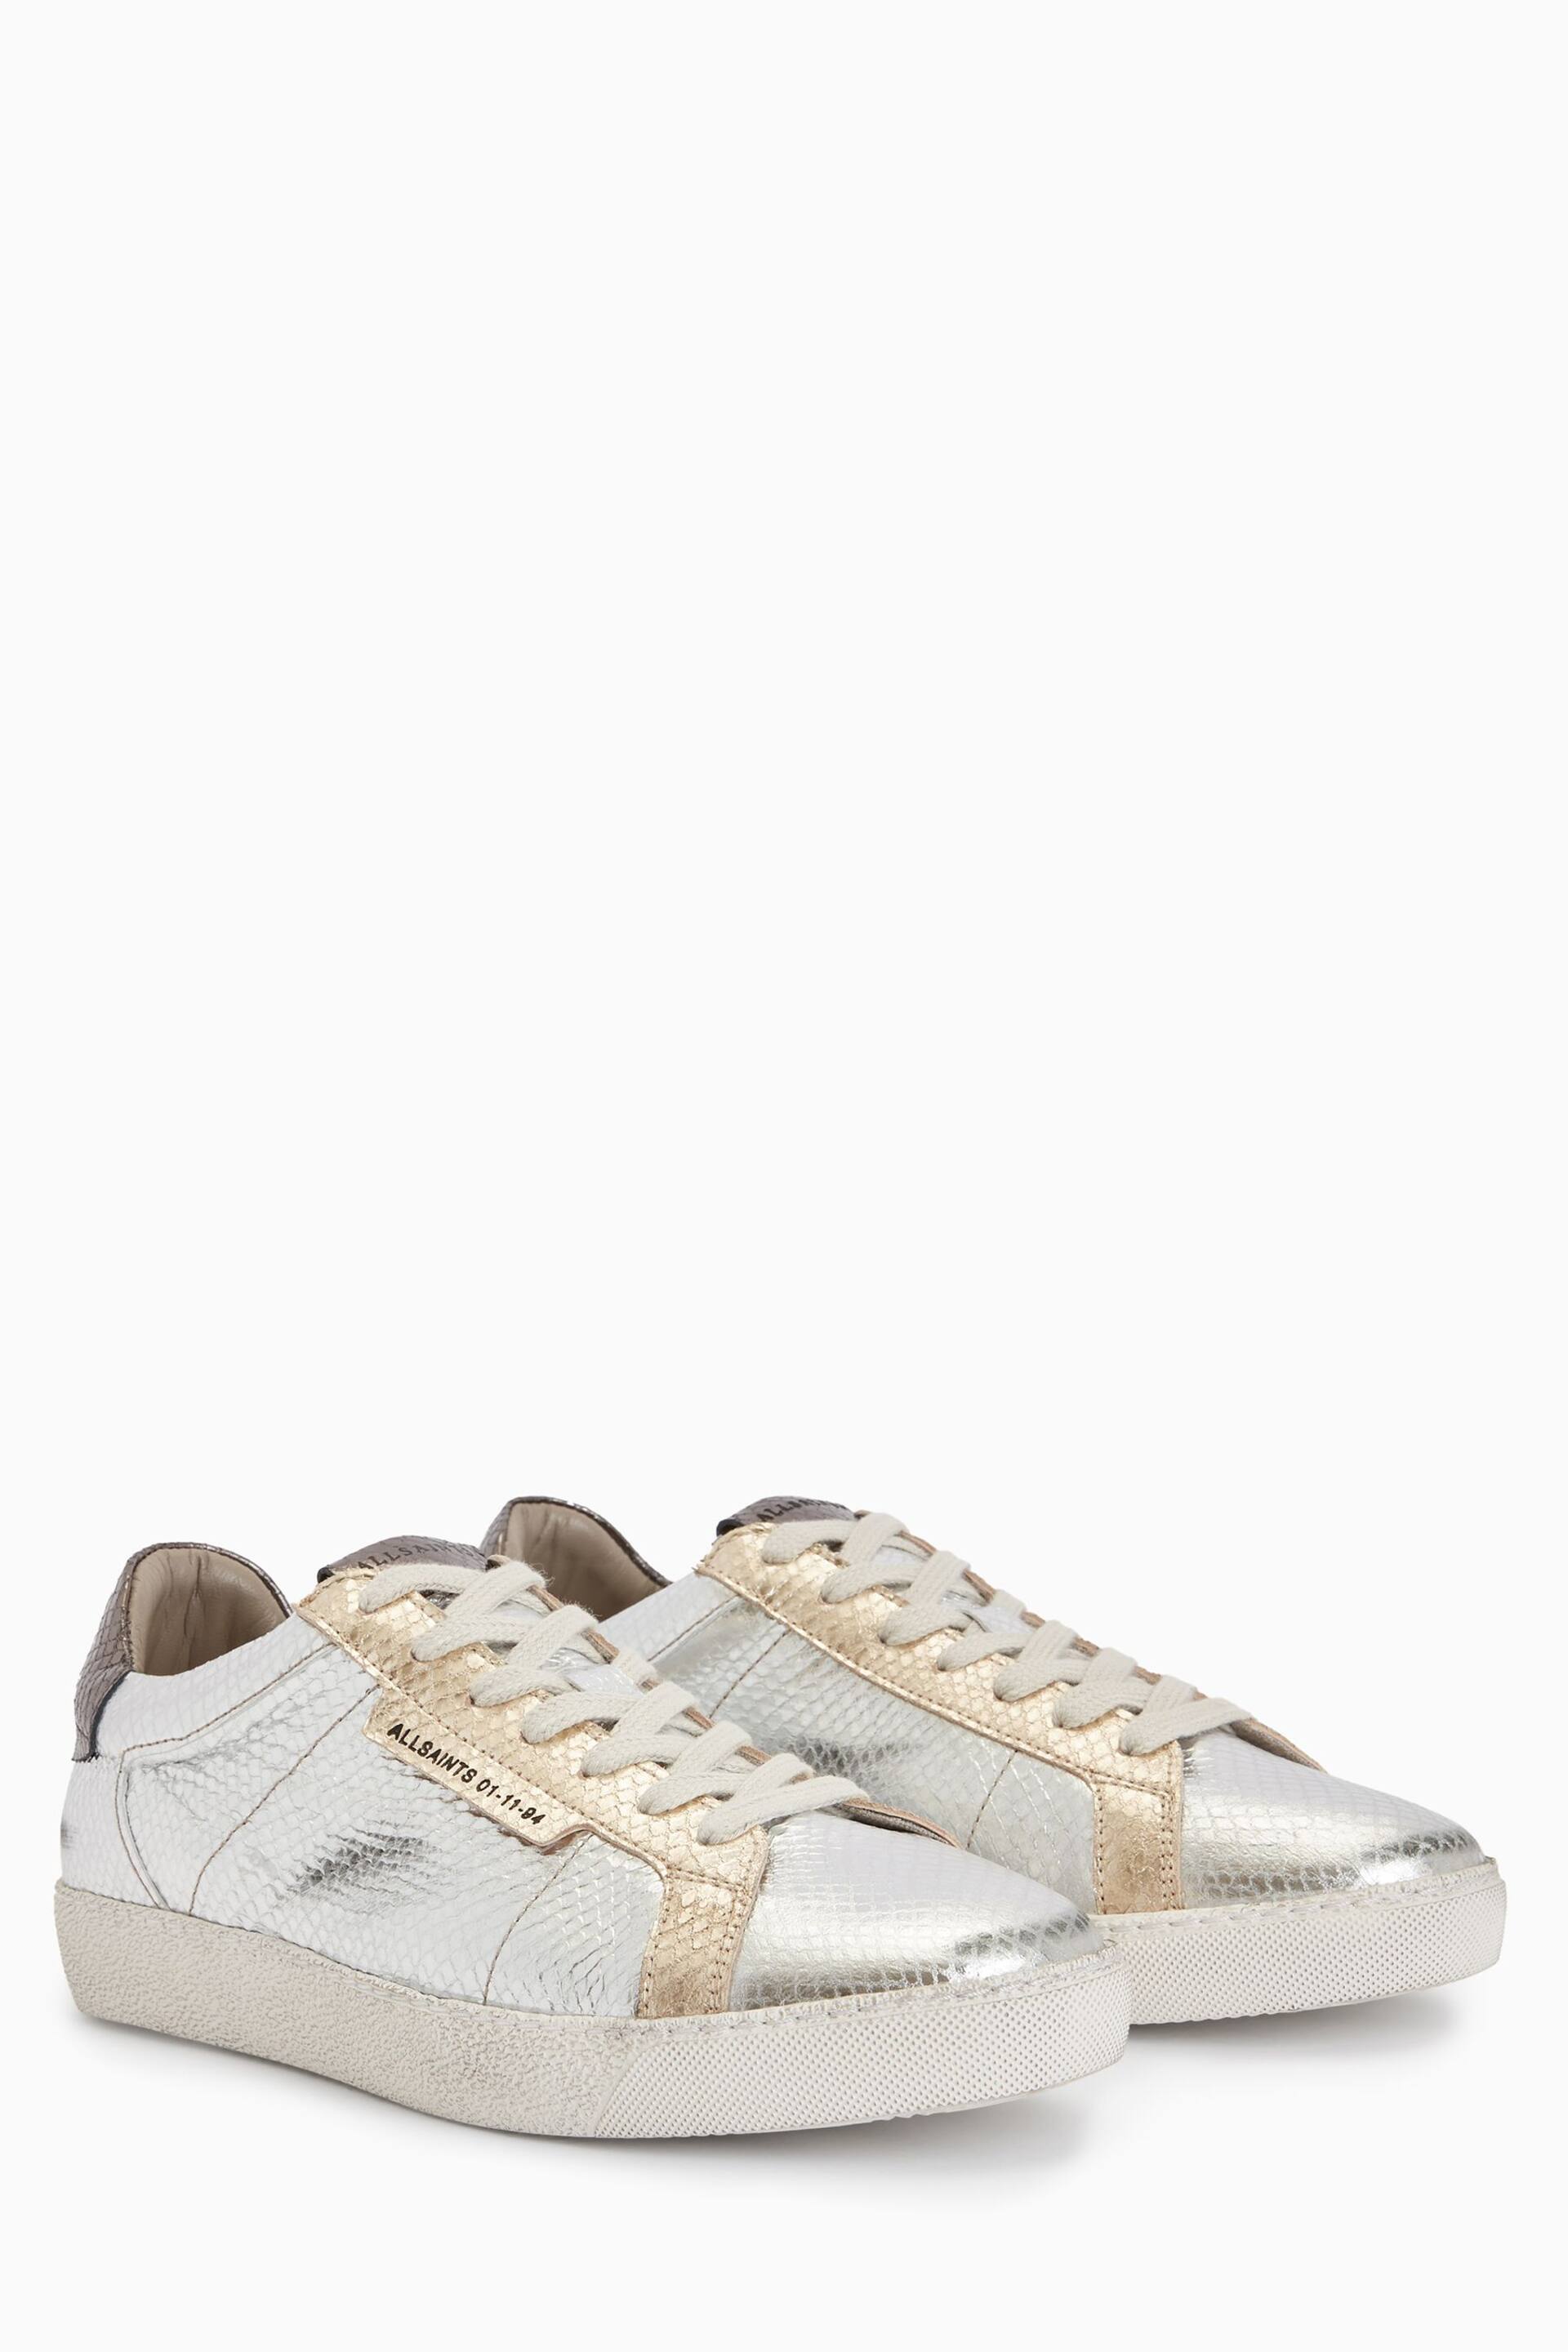 AllSaints Gold Sheer Metallic Trainers - Image 2 of 6